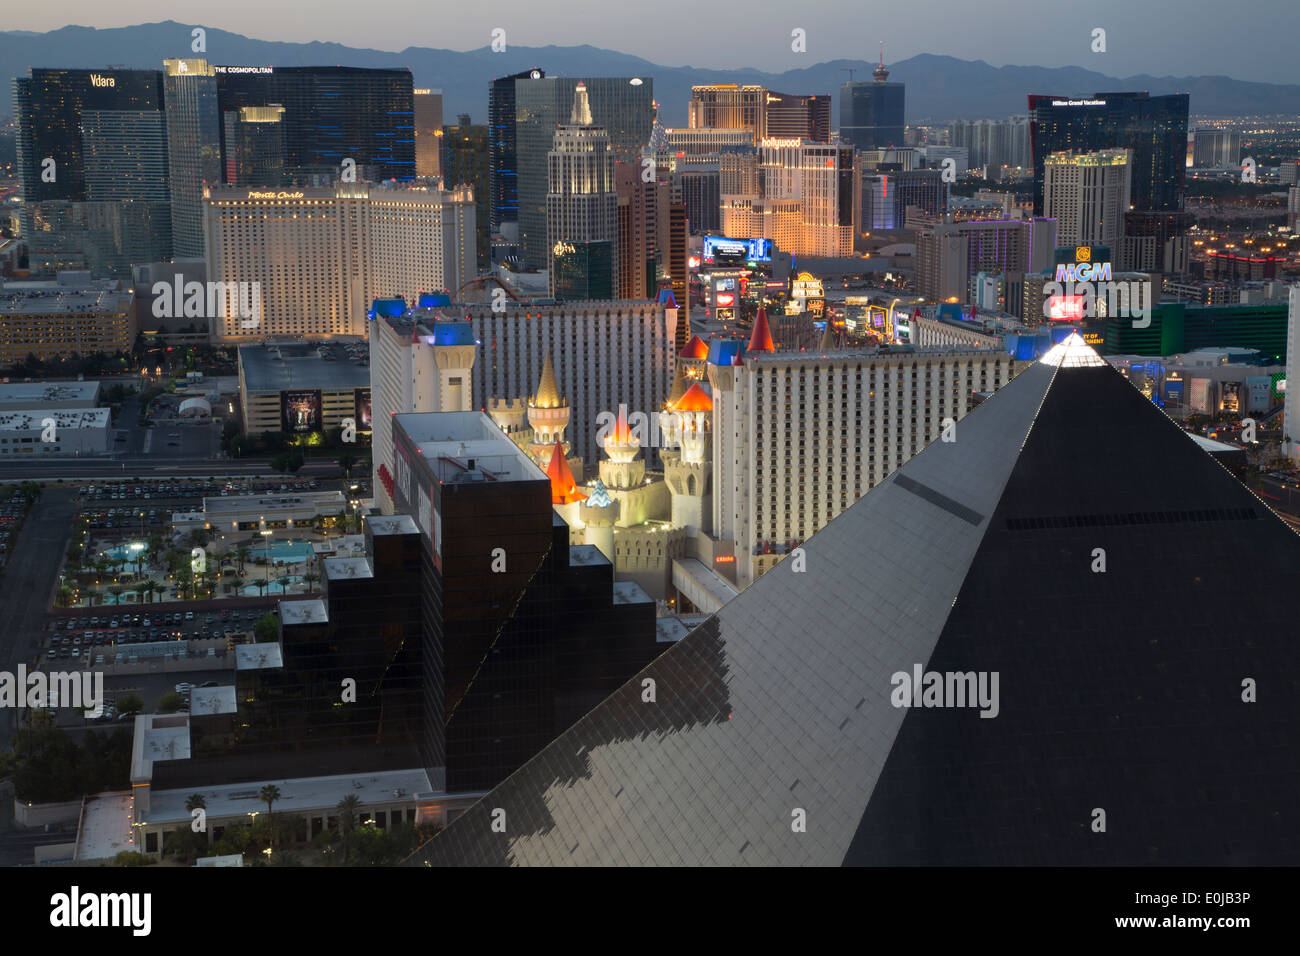 A Dusk and Aerial View Of The Las Vegas Strip of Hotels and Casinos Stock Photo